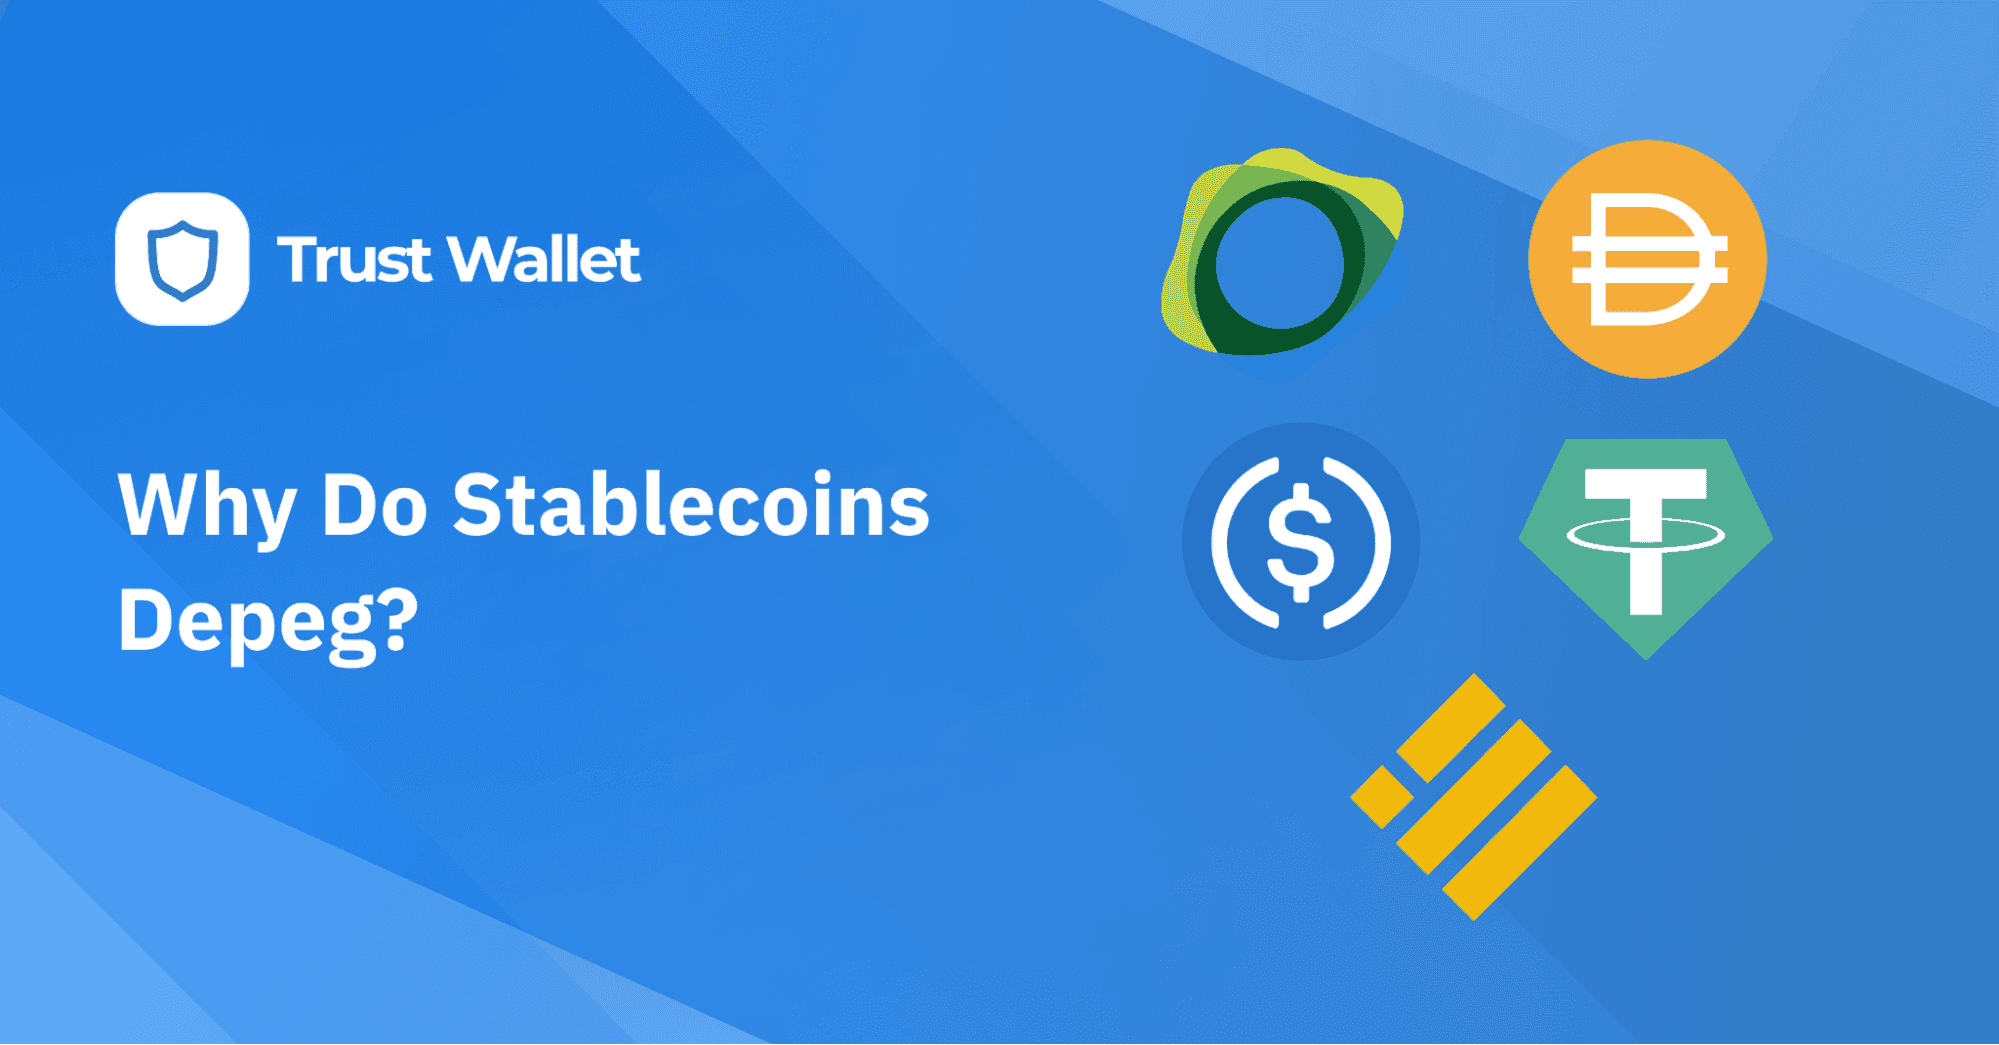 Why Do Stablecoins Depeg?